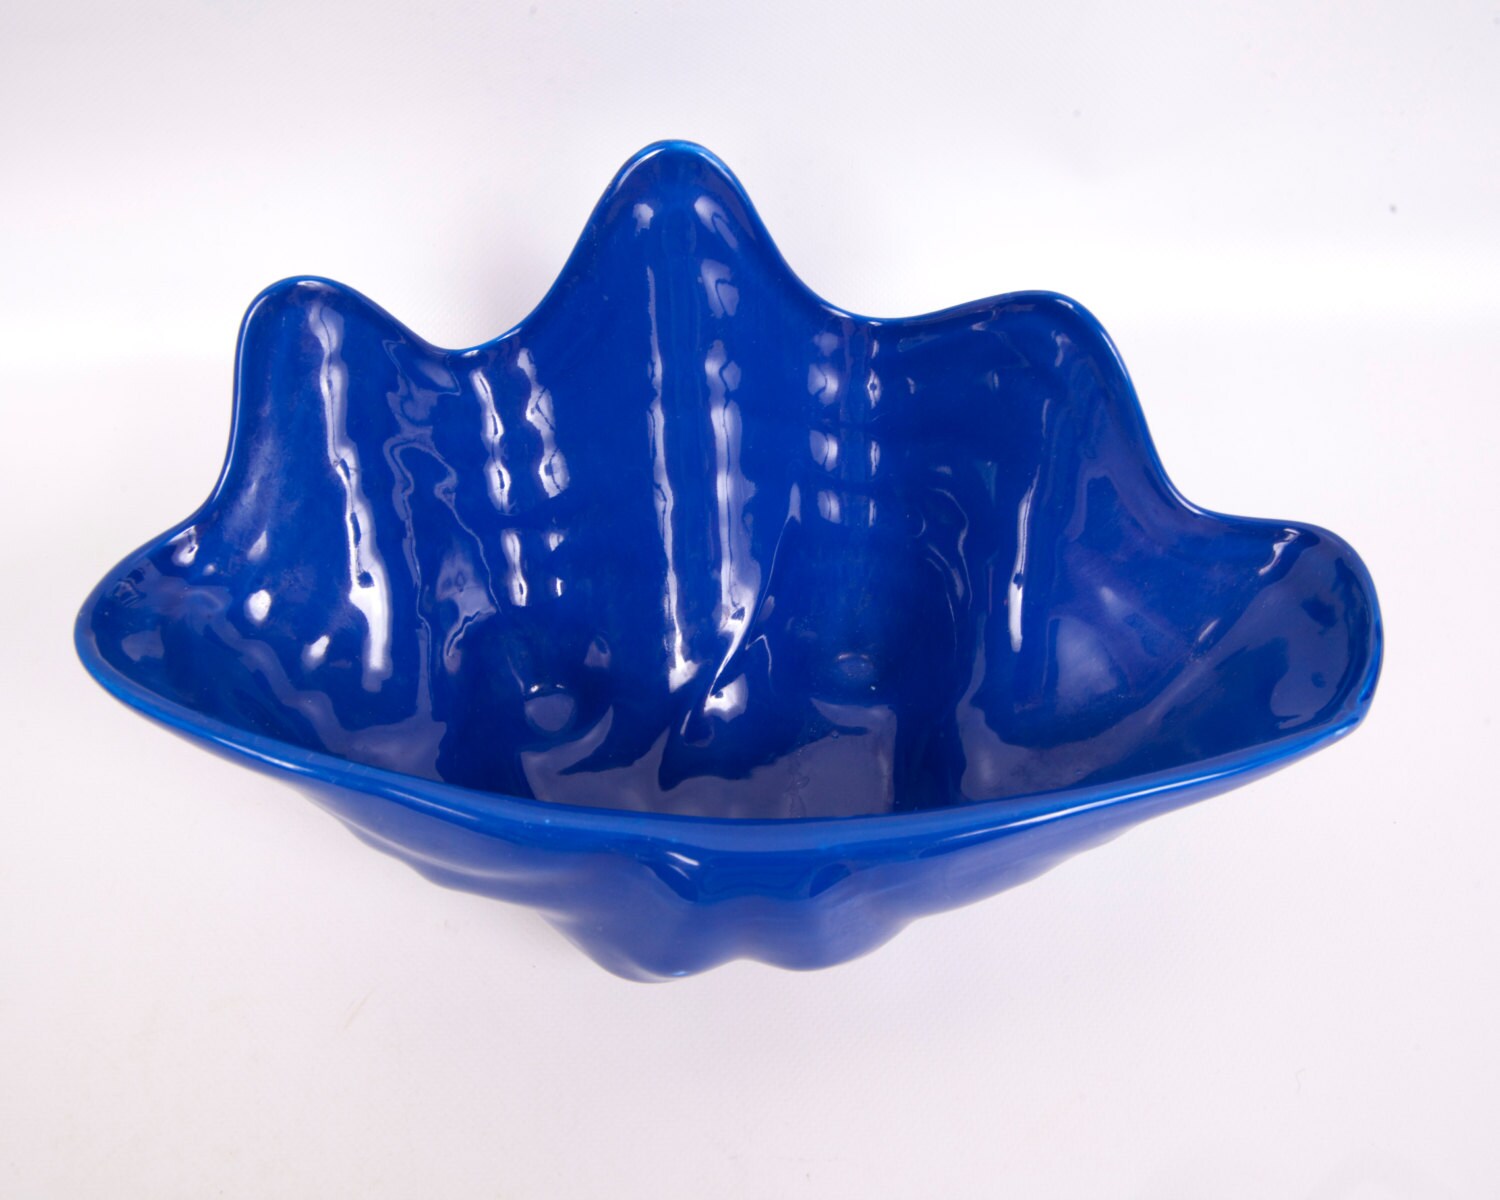 Vintage Blue Clam Shell Shaped Pottery Bowl By Levintagegalleria